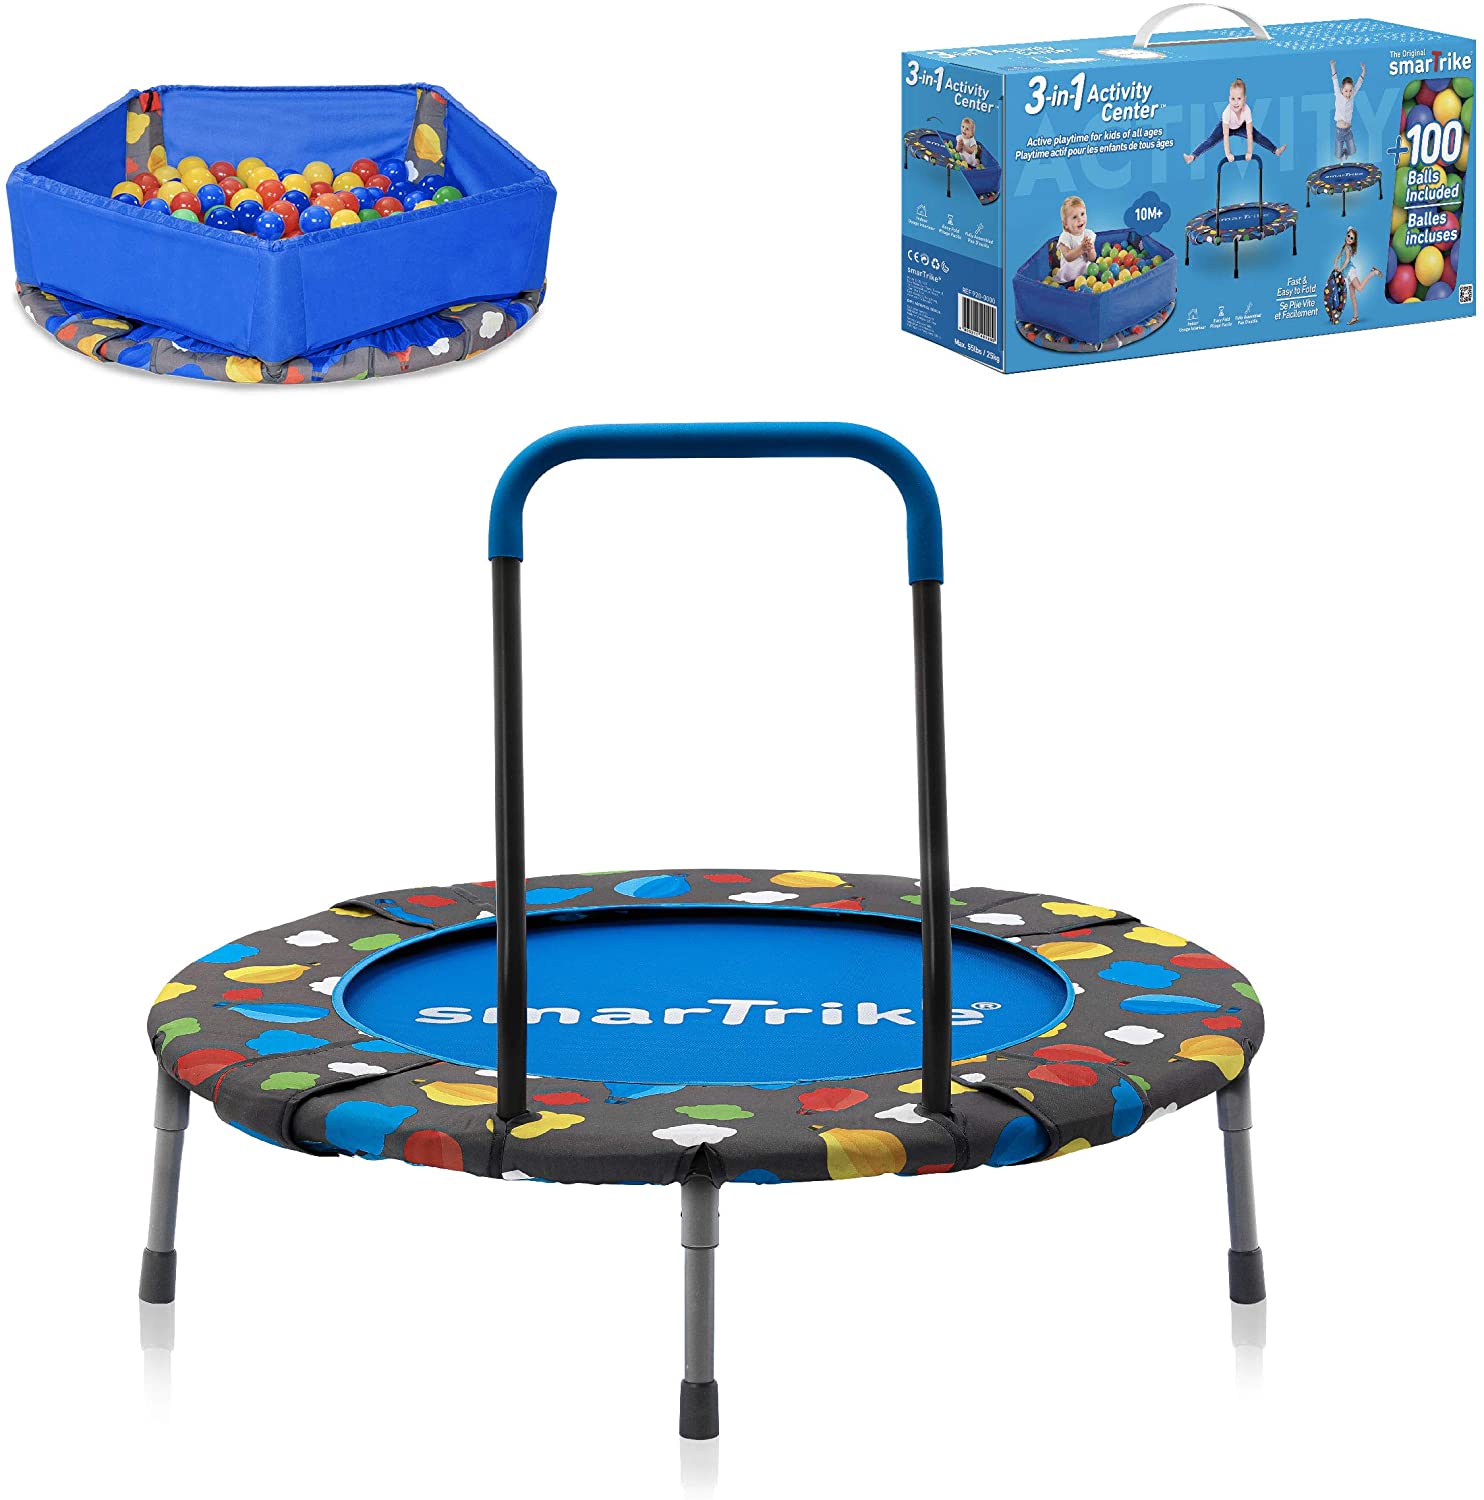 SmarTrike Activity Center 3-in-1 Foldable Trampoline Review